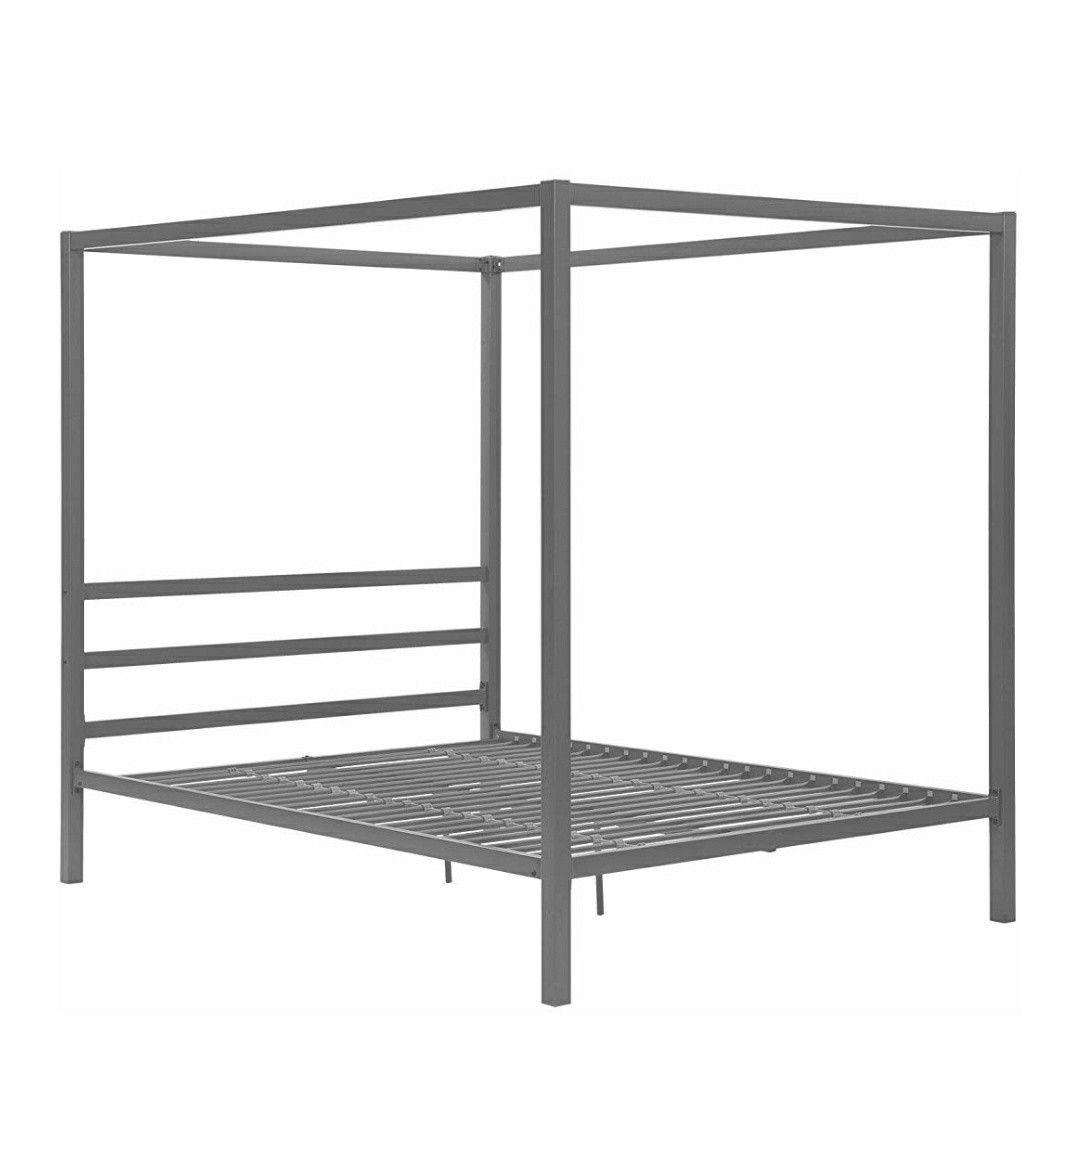 Modern Canopy Bed Frame, Classic Design, Queen Size, Grey